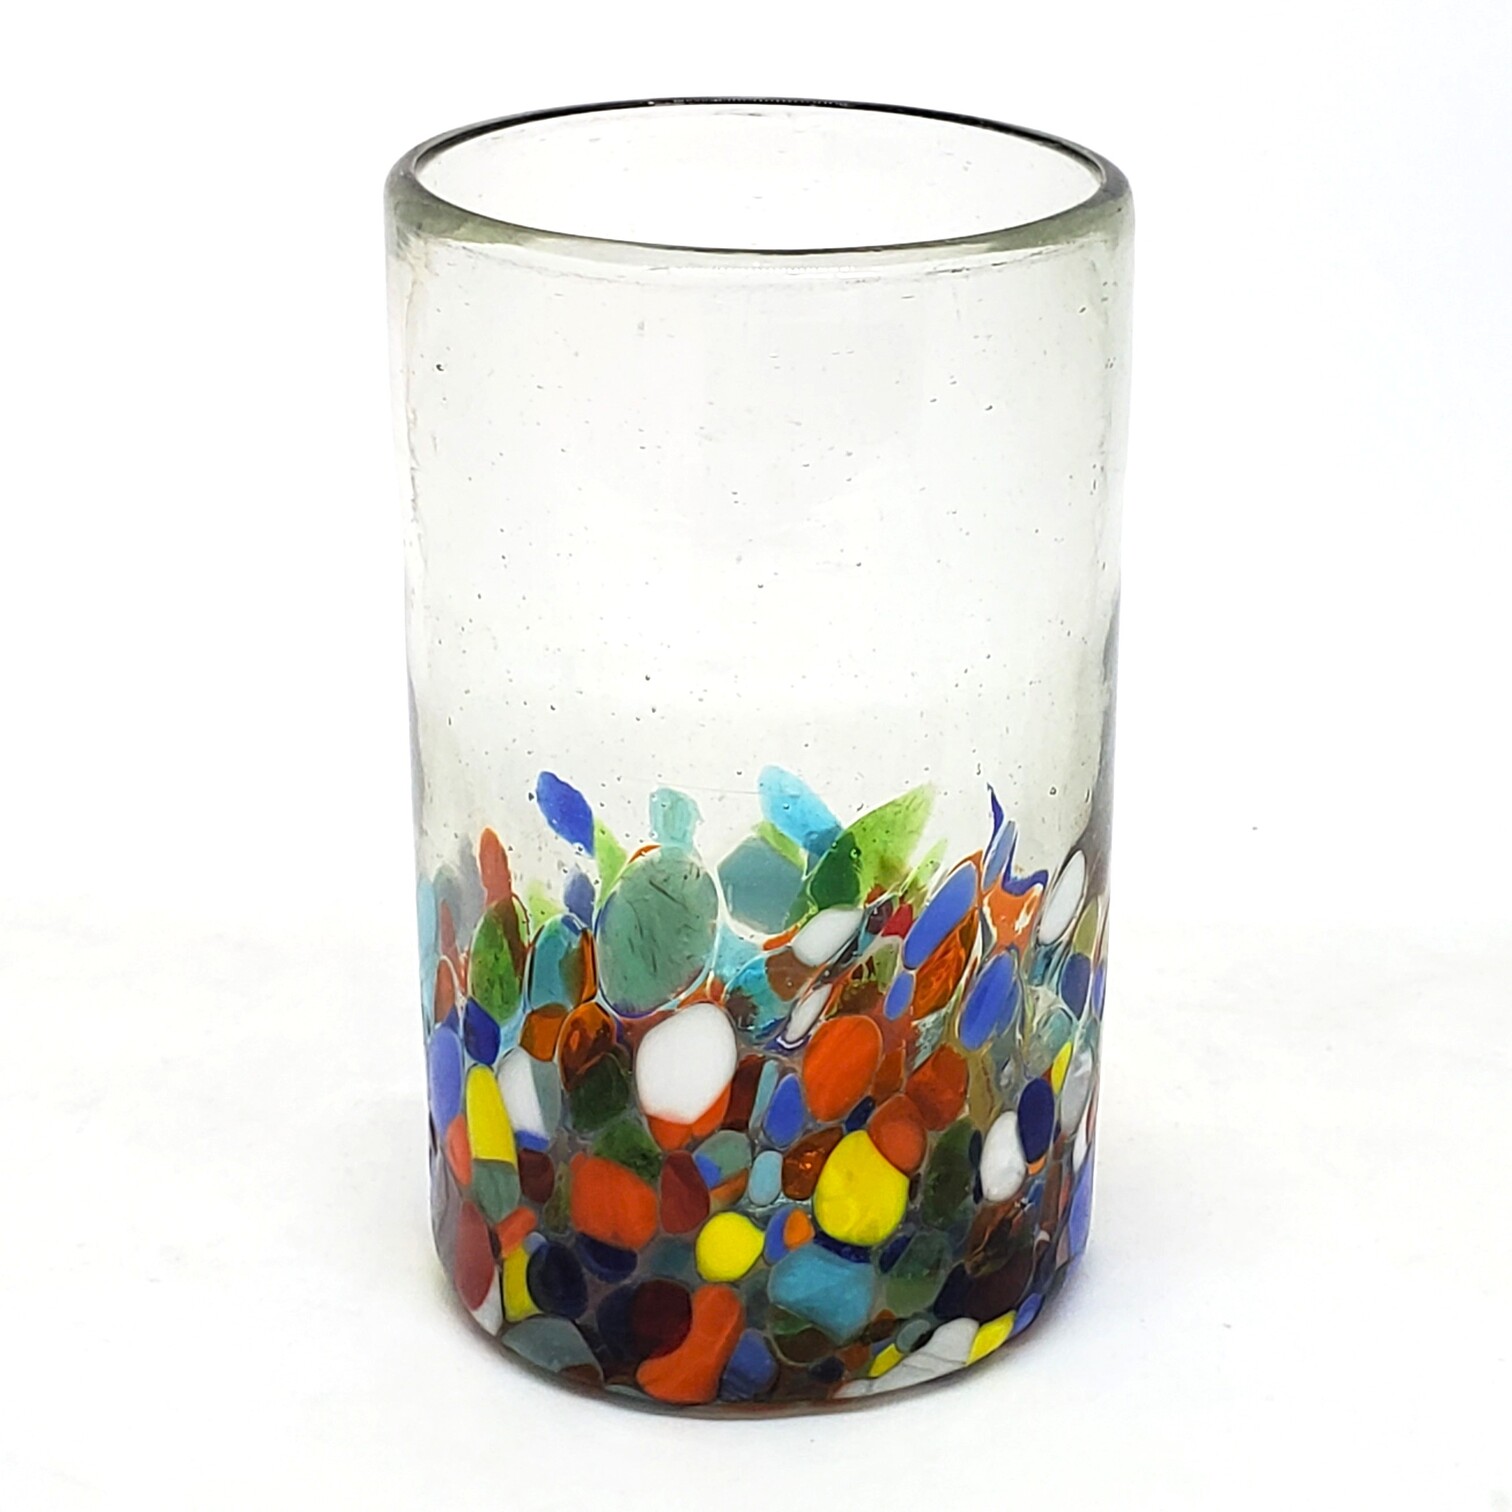 https://mexhandcraft.com/imgProducts/Clear%20&%20Confetti%2014%20oz%20Drinking%20Glasses%20(set%20of%206)%20(2).jpg